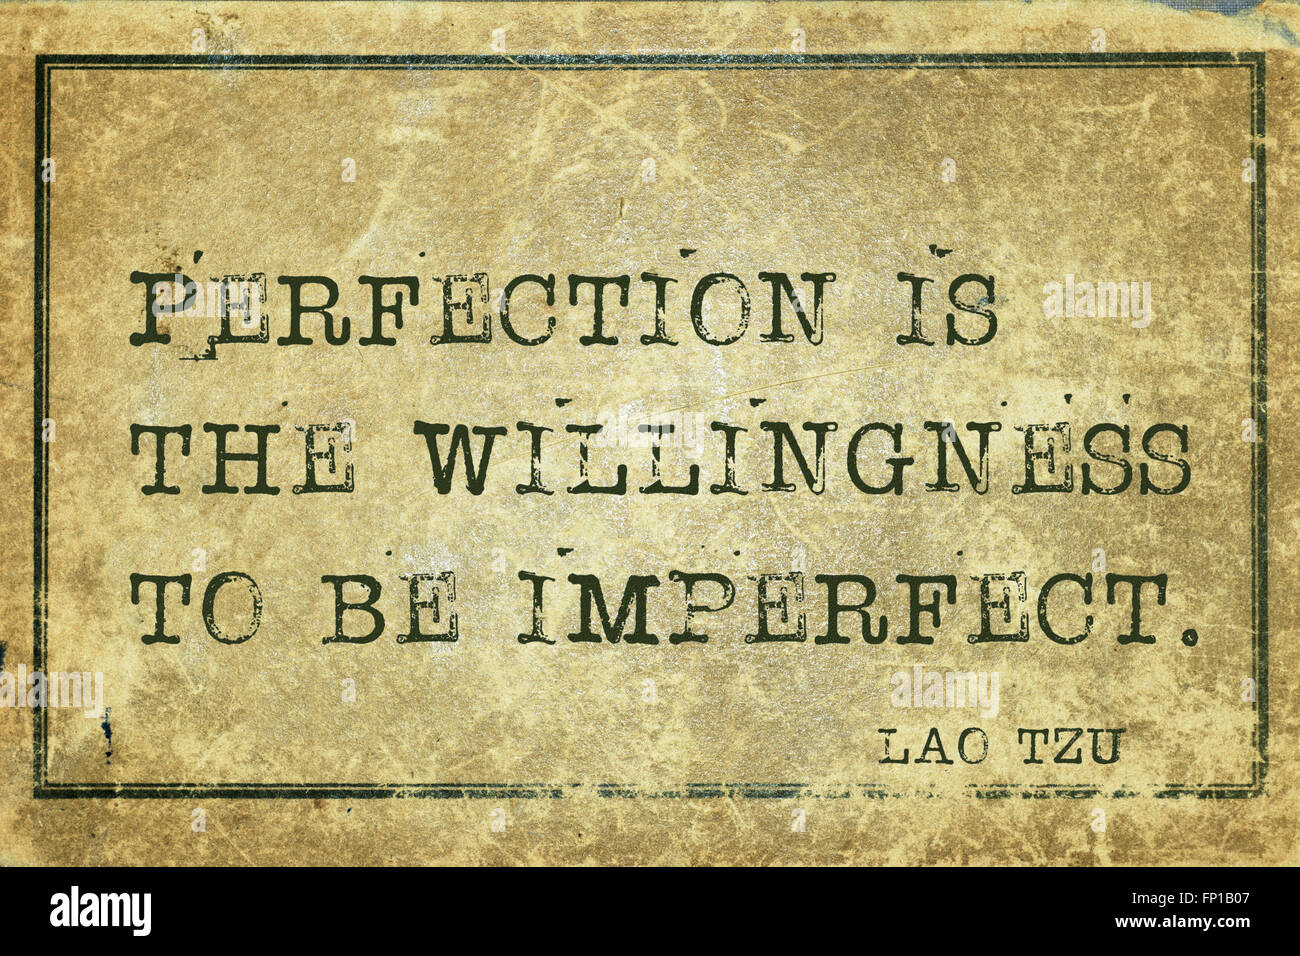 Perfection is the willingness to be imperfect - ancient Chinese philosopher Lao Tzu quote printed on grunge vintage cardboard Stock Photo